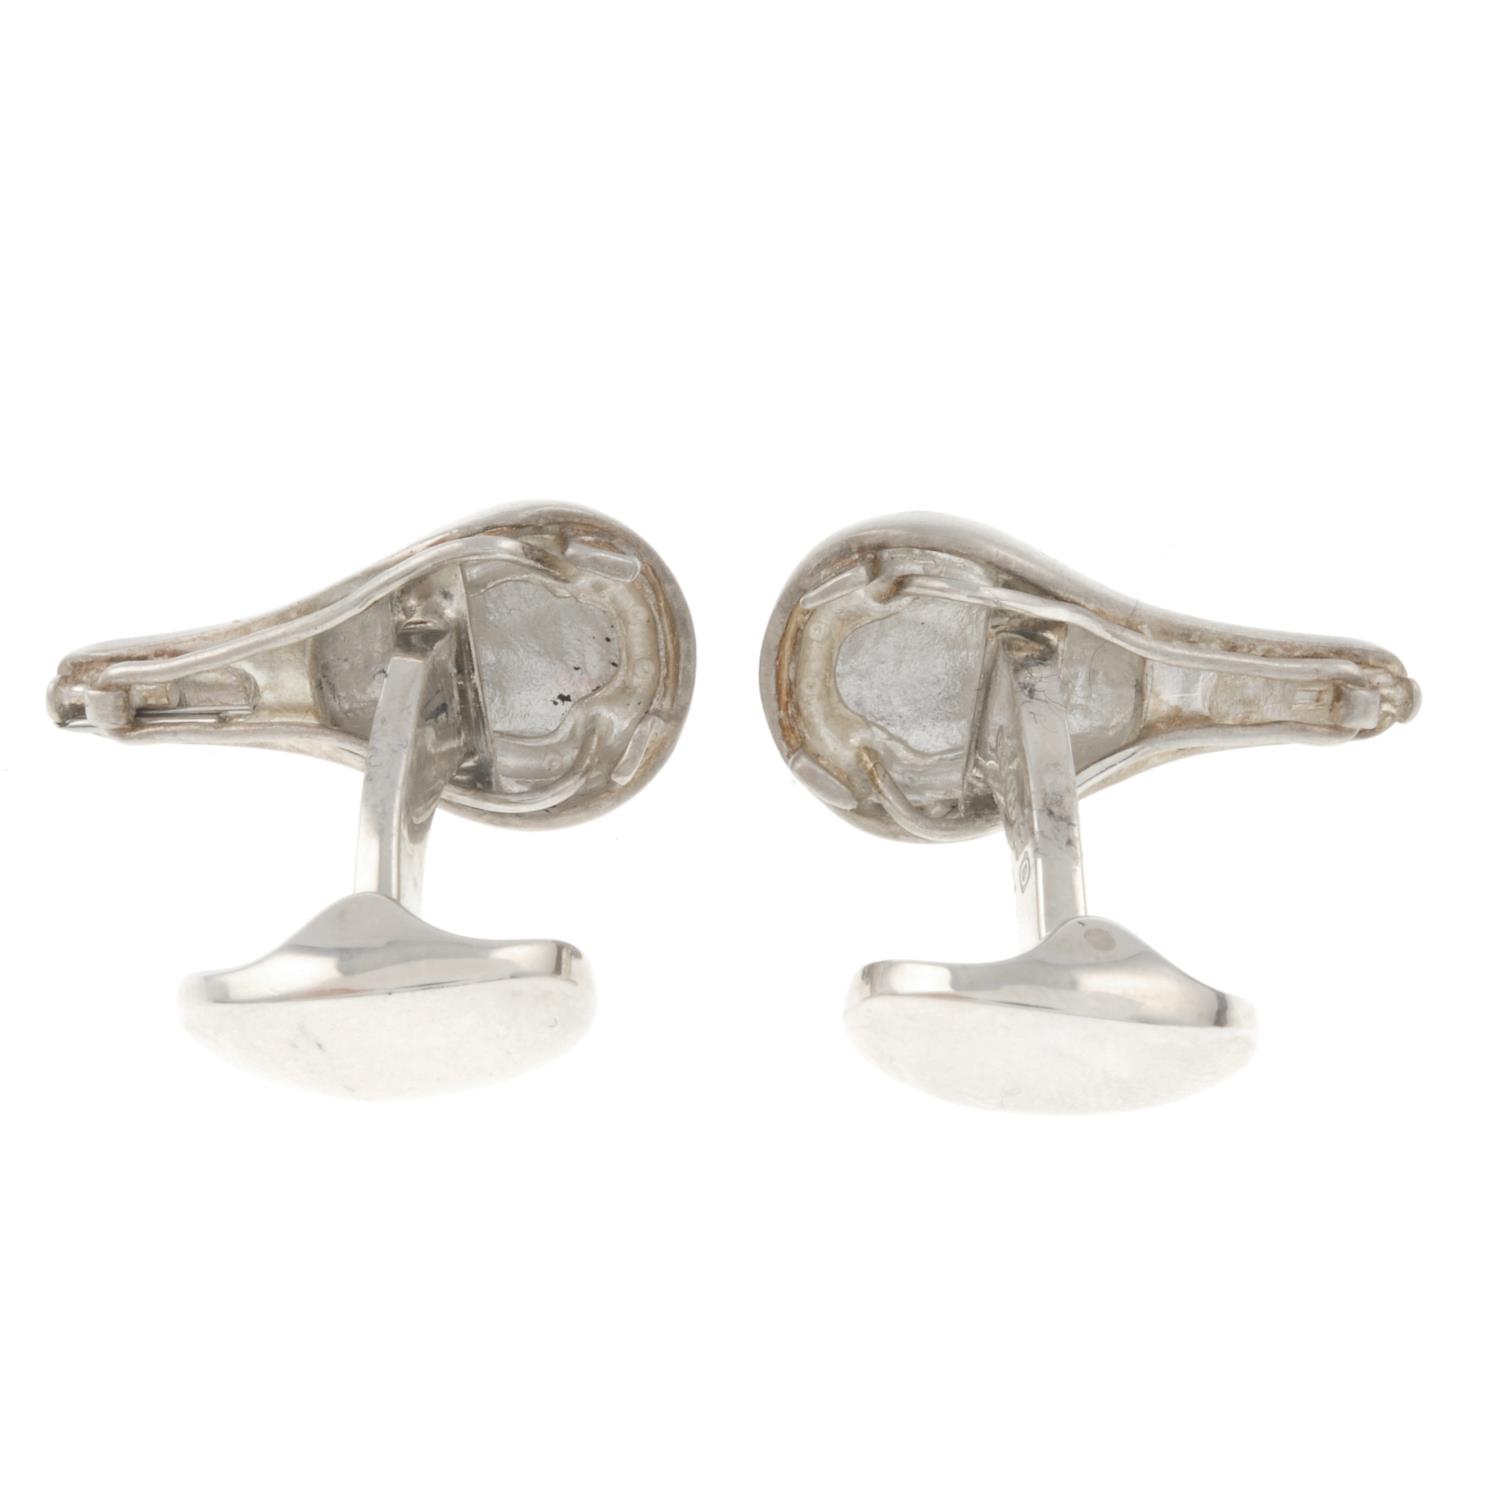 A pair of silver bicycle seat cufflinks, by Deakin and Francis.Signed D&F. - Image 3 of 3